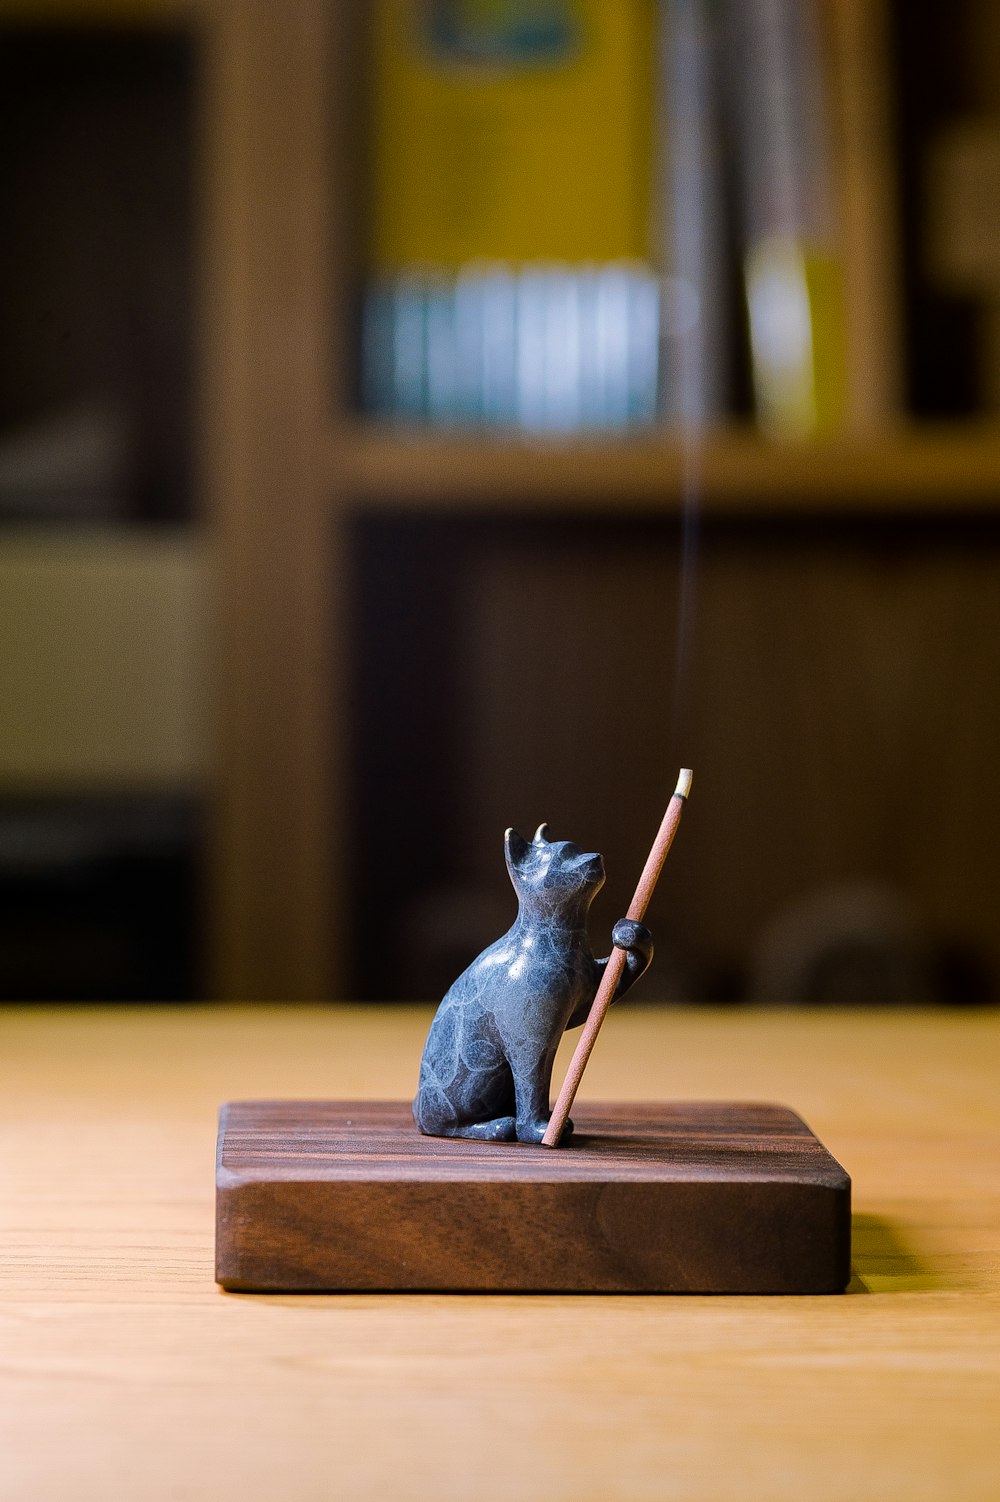 a small figurine of a cat holding a pencil